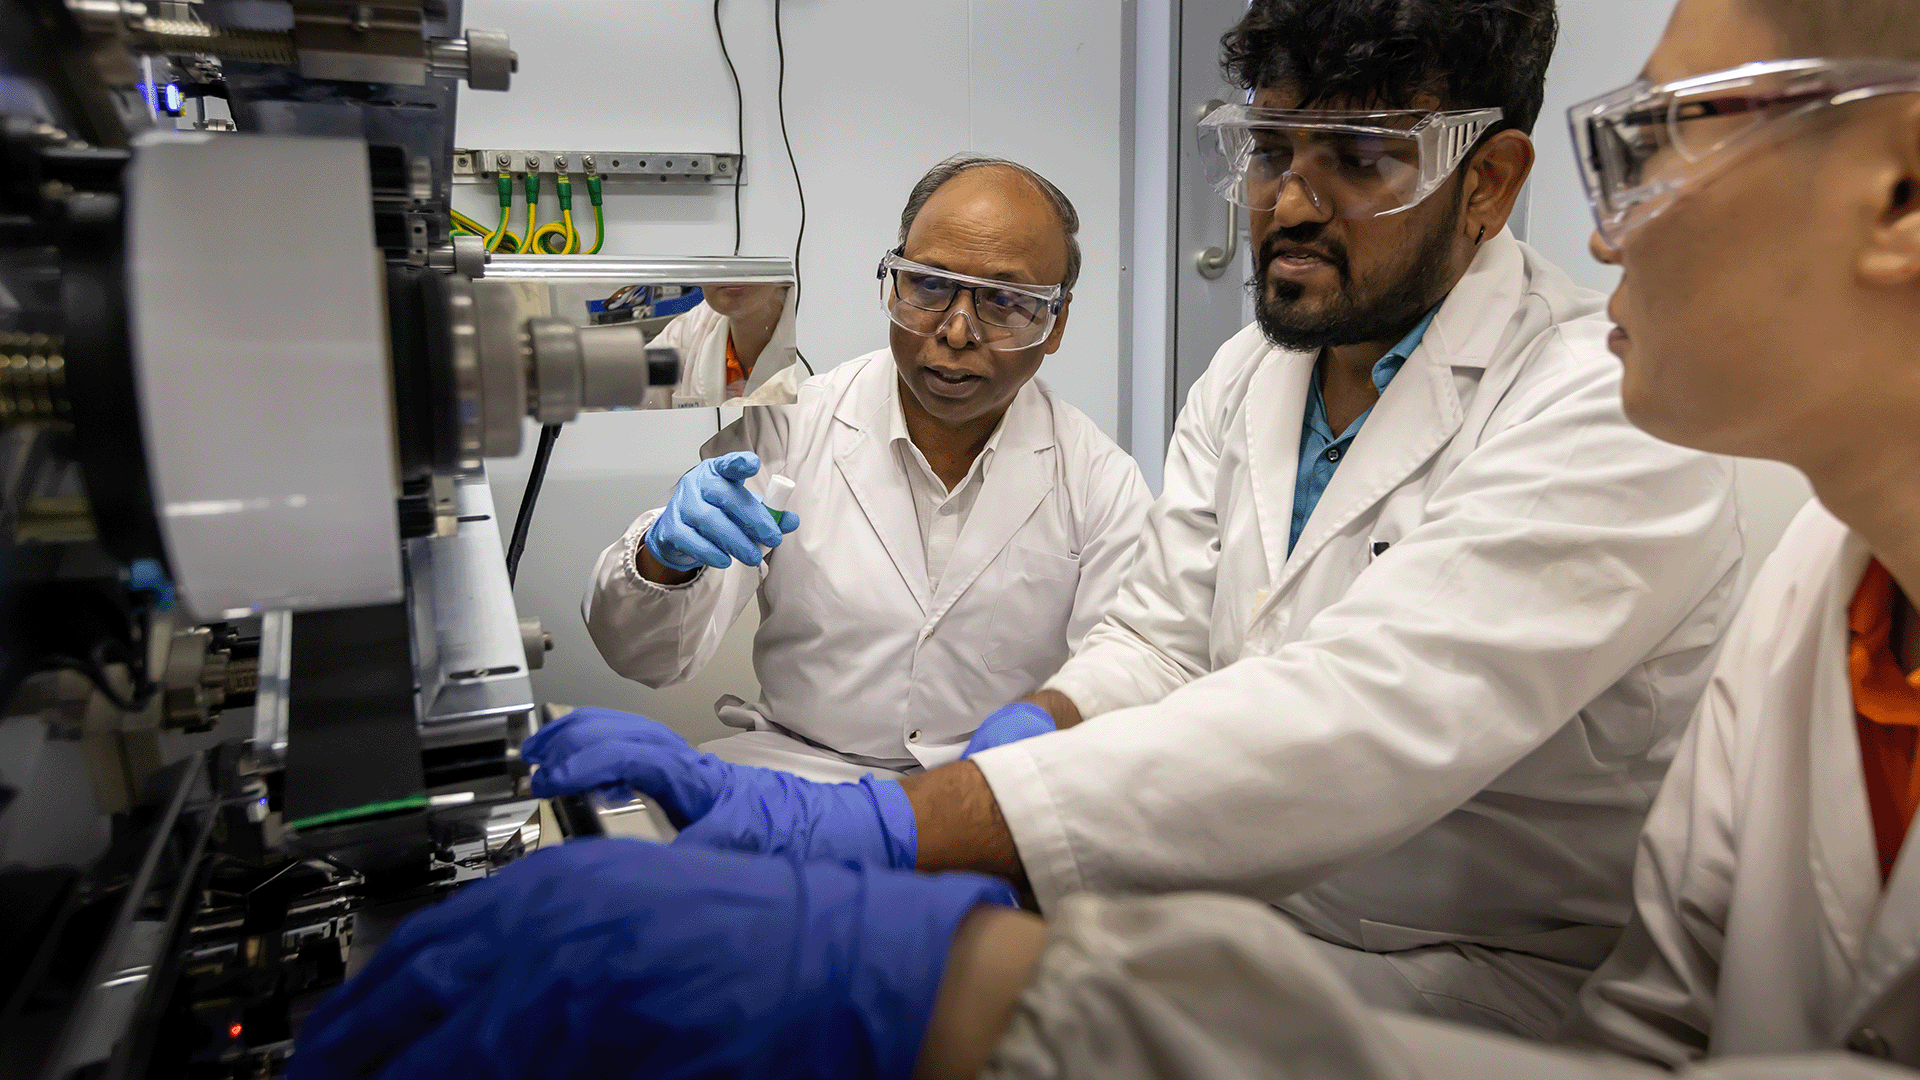 Assoc Prof Palani Balaya (rear, left) at work in the Battery Research Lab at CDE. Pictured with (from right) Senior Research Fellow Dr Markas Law and Research Associate Karthick Babu.